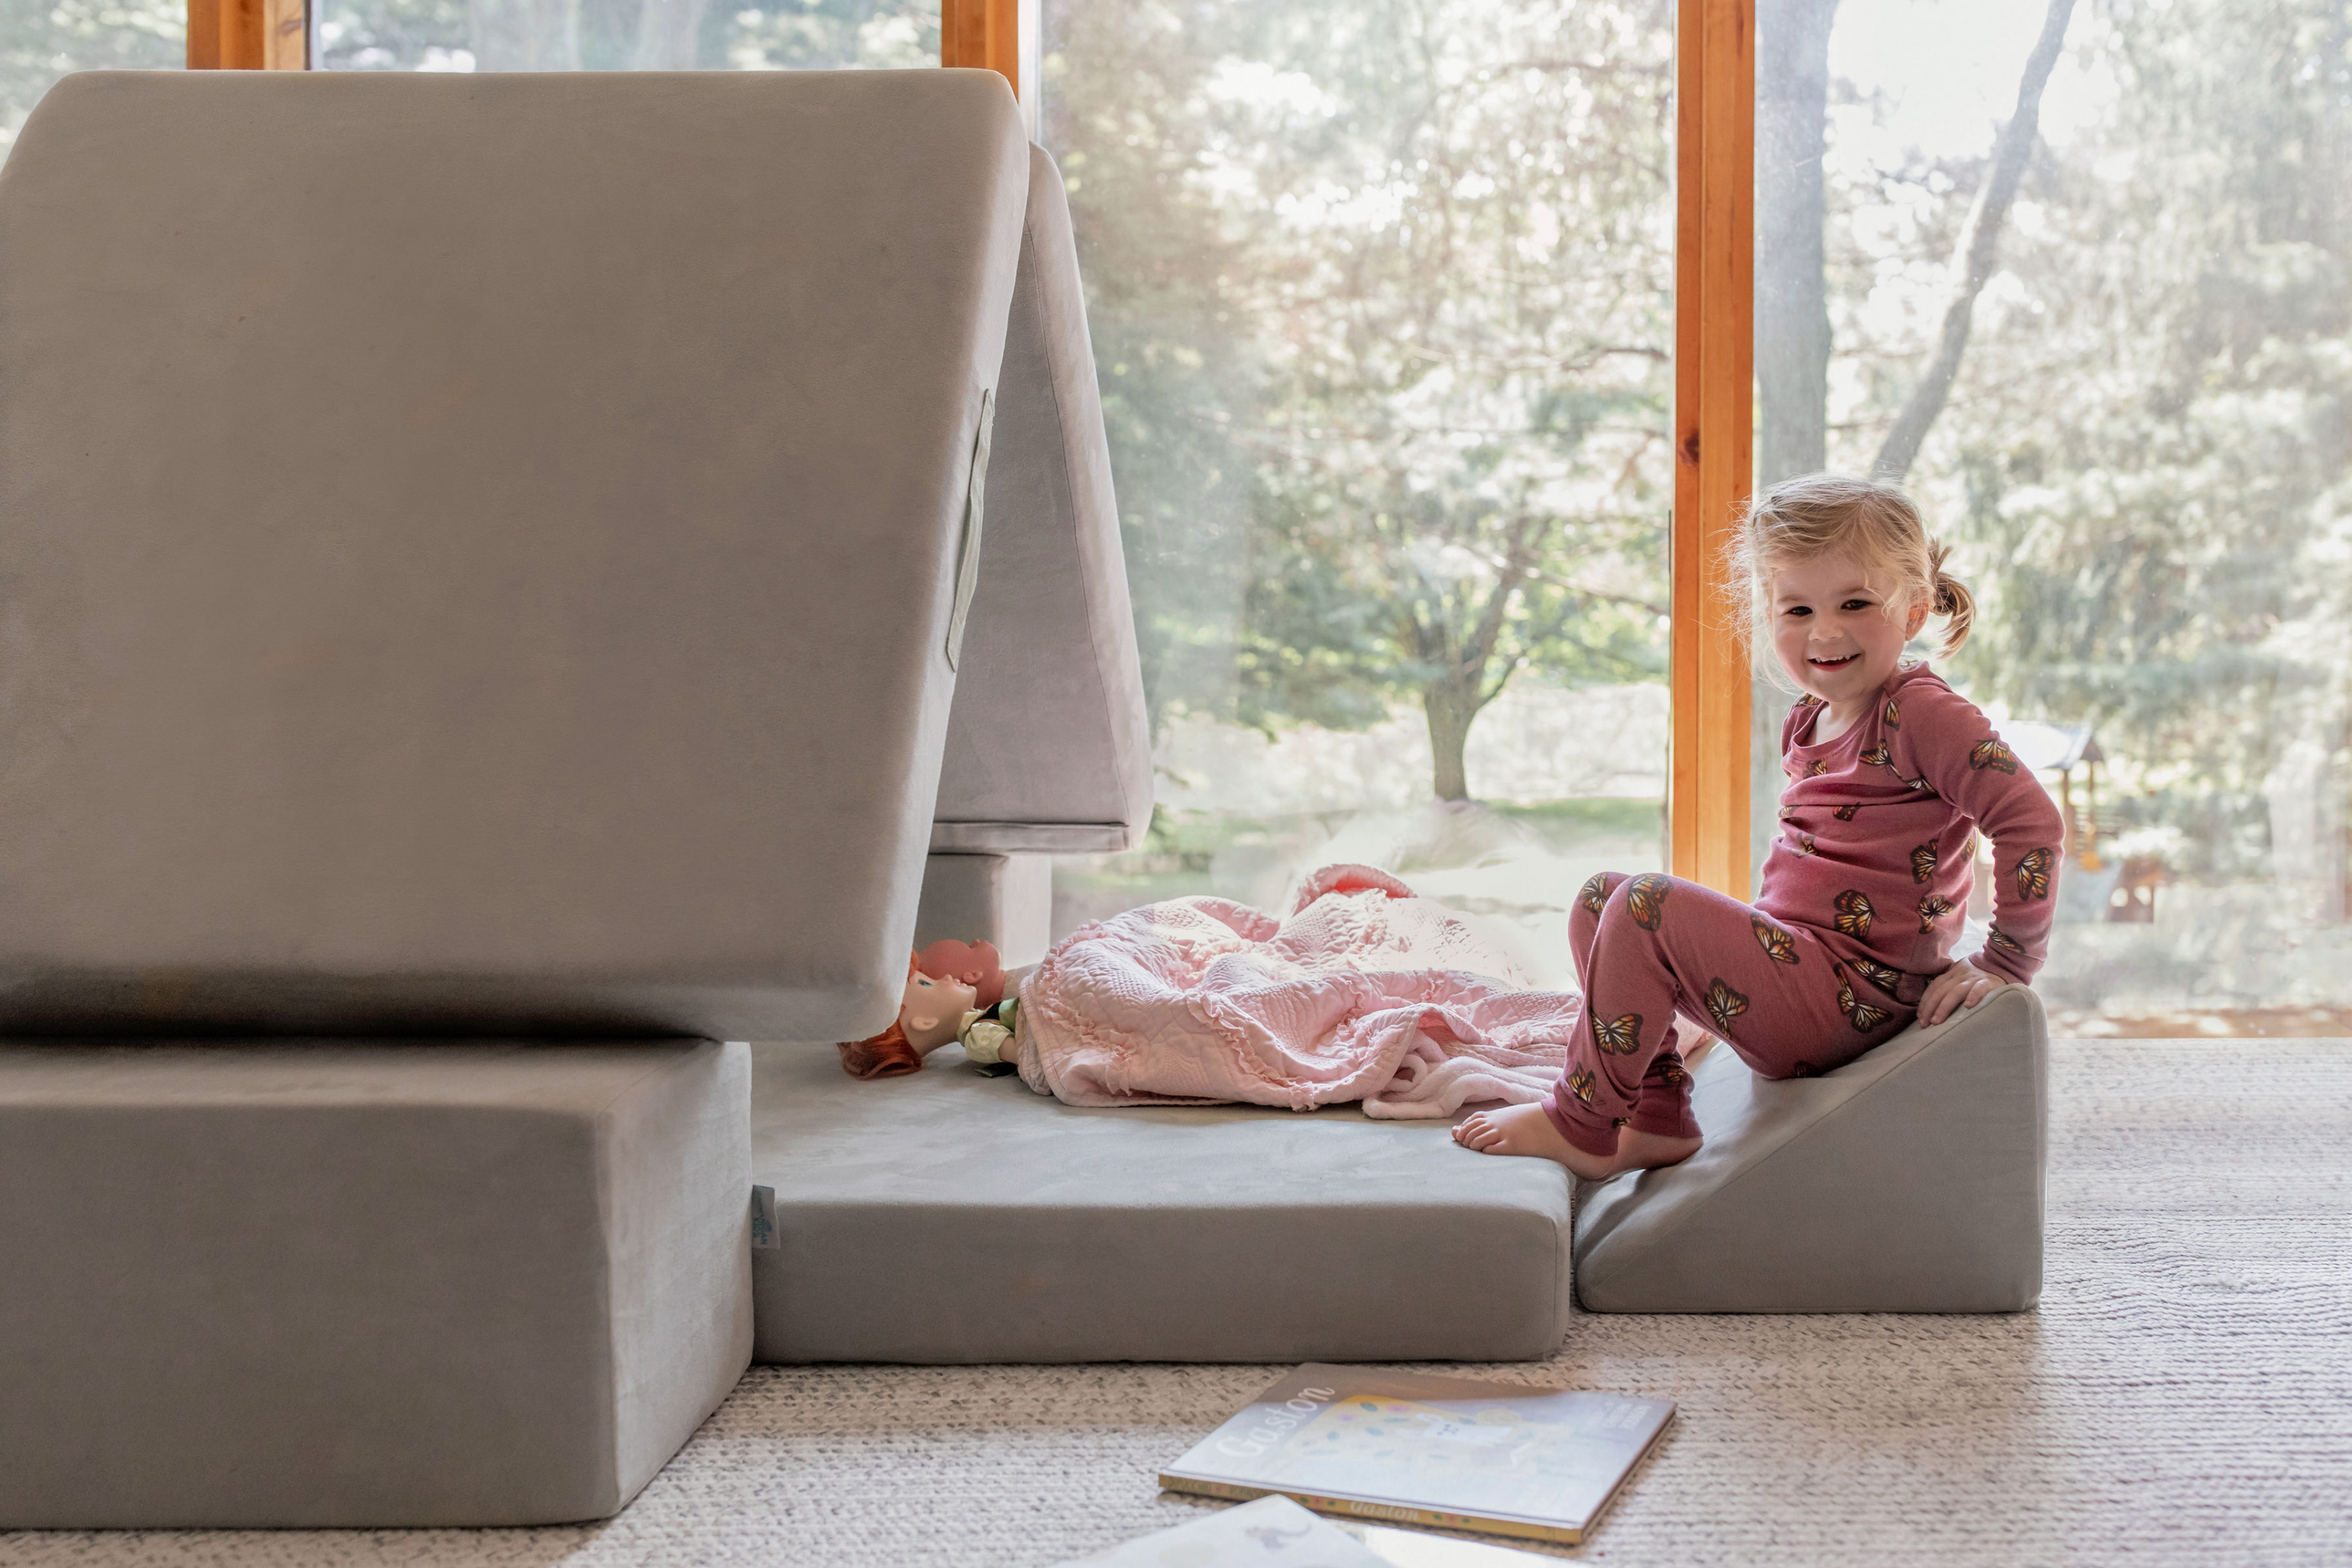 The Figgy Play Couch in Action